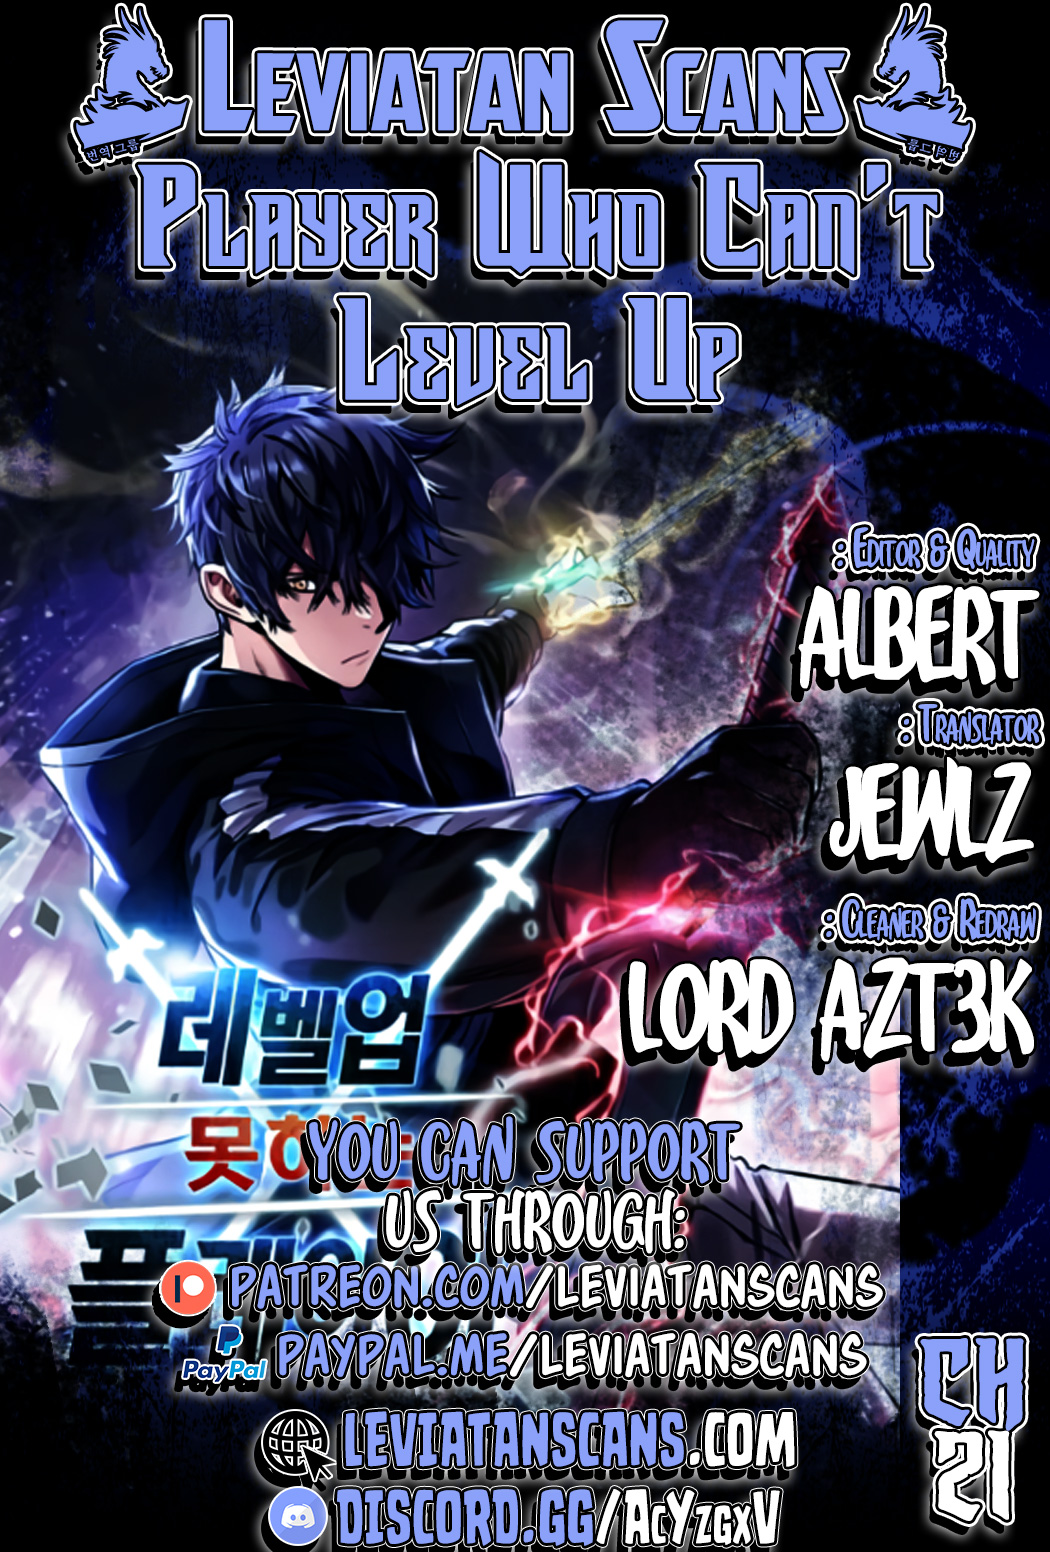 The Player That Can't Level Up - Chapter 2549 - Image 1